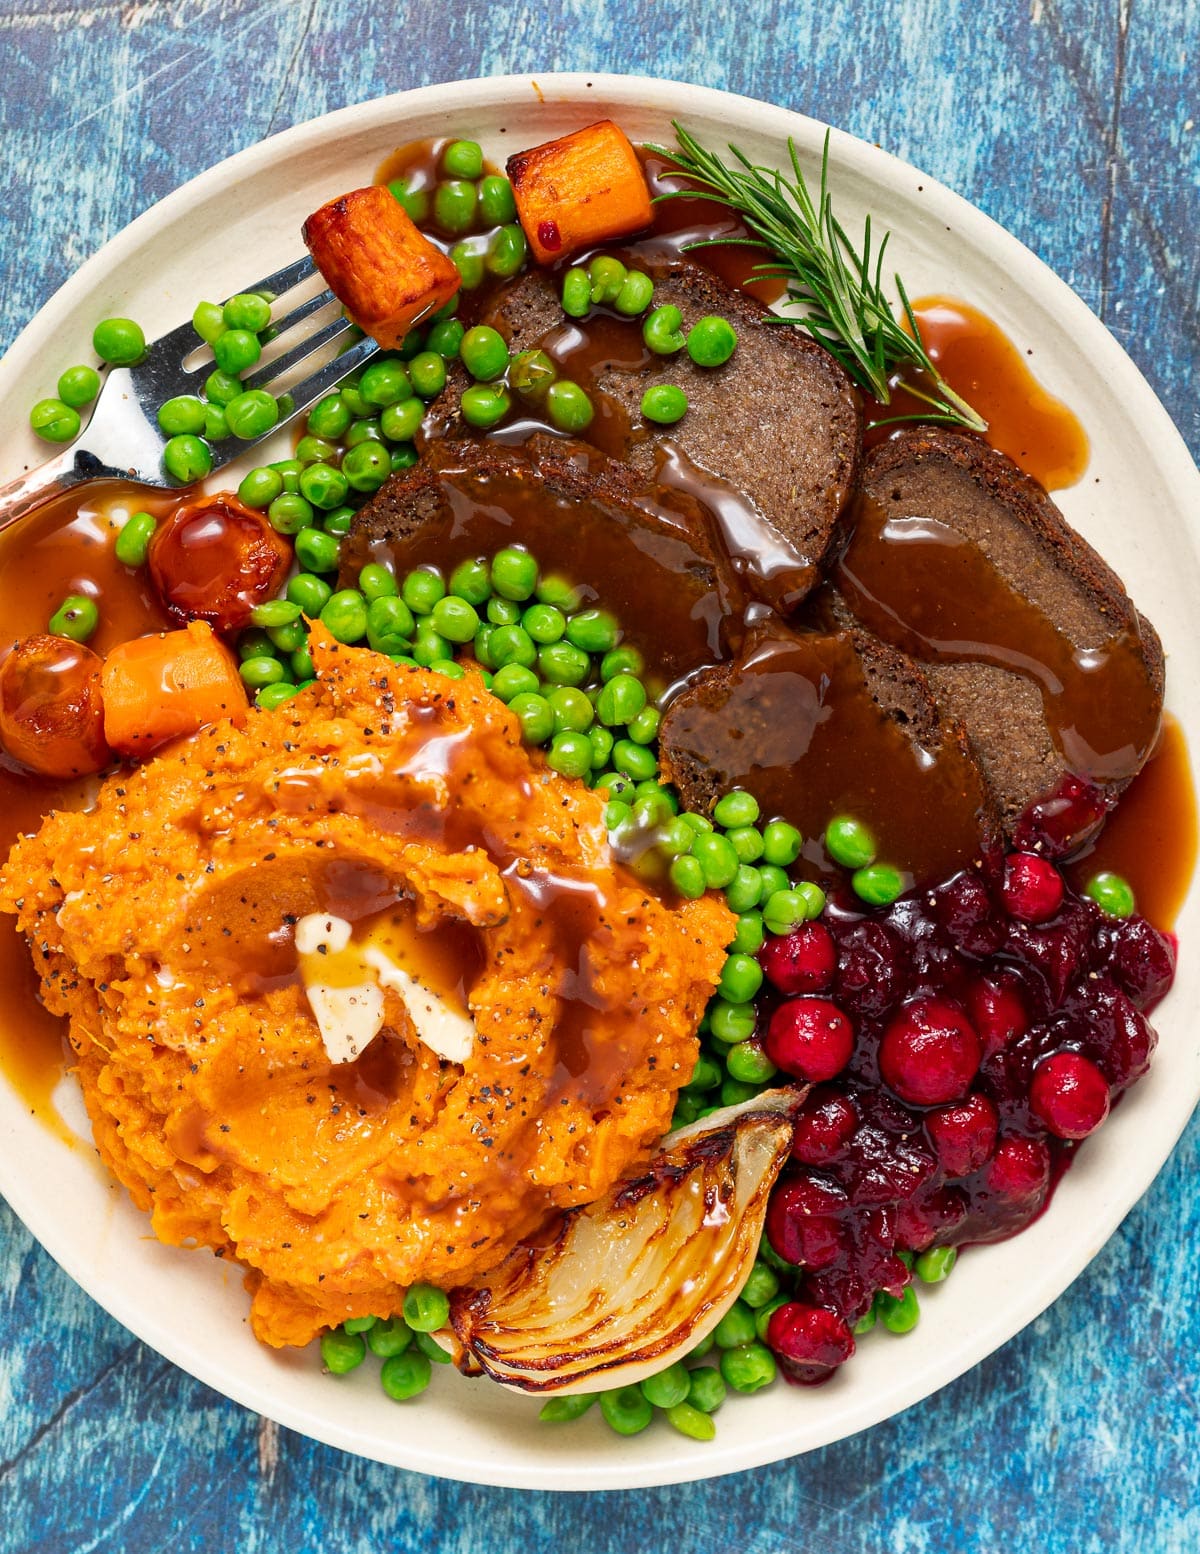 a plate of gluten-free seitan, mashed sweet potato, gravy and vegetables